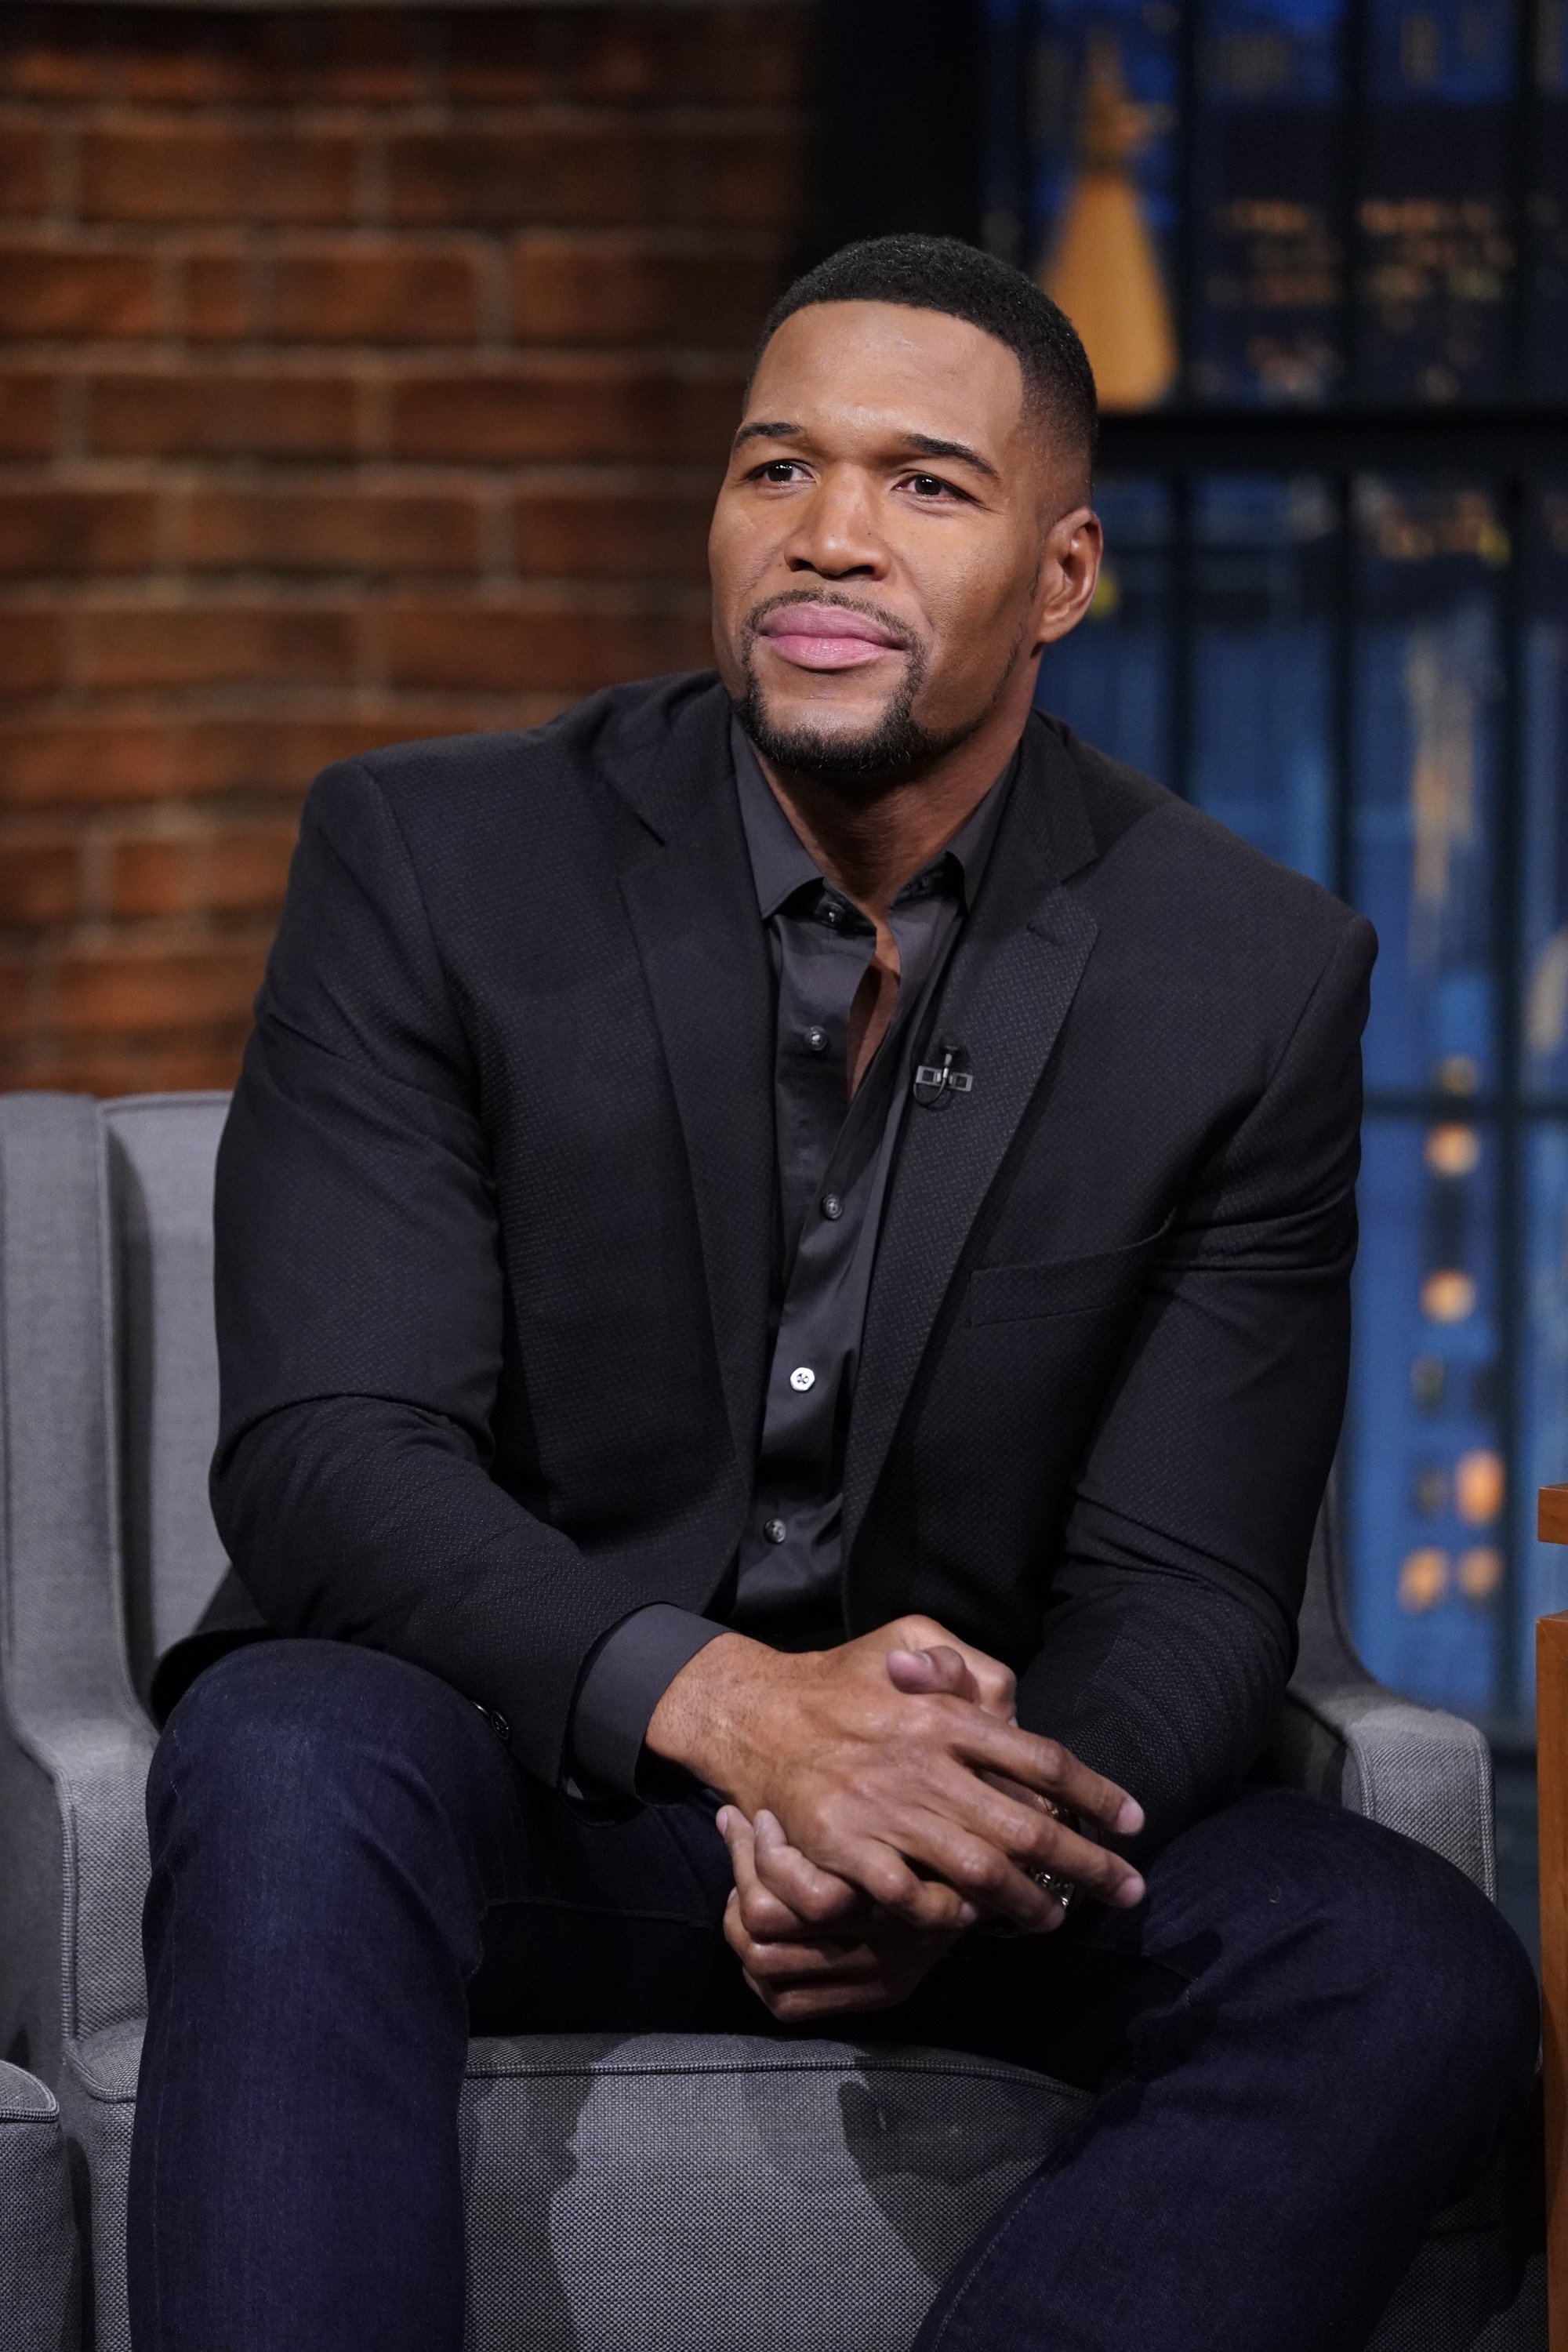 TV personality Michael Strahan during an interview on January 17, 2019 on "Late Night With Seth Meyers" | Source: Getty Images